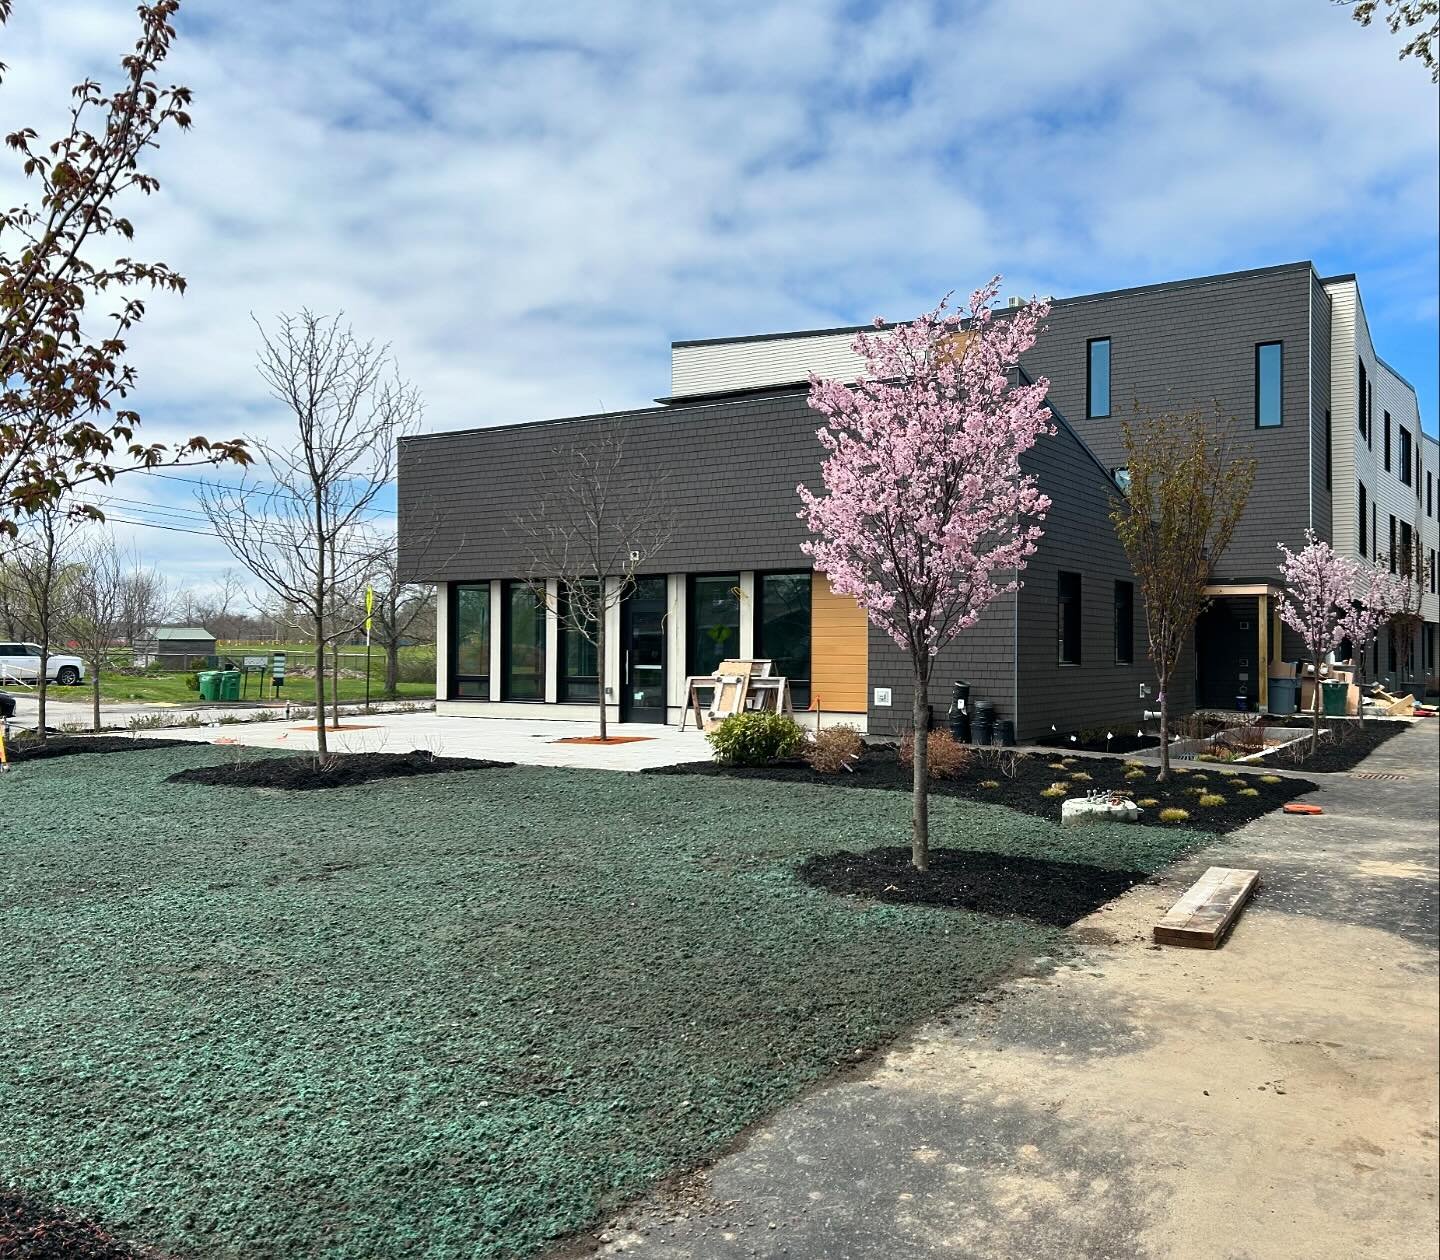 Fresh grass seed and tree blooms at our Front Street Phase 2 housing project in Portland. #zachauconstruction